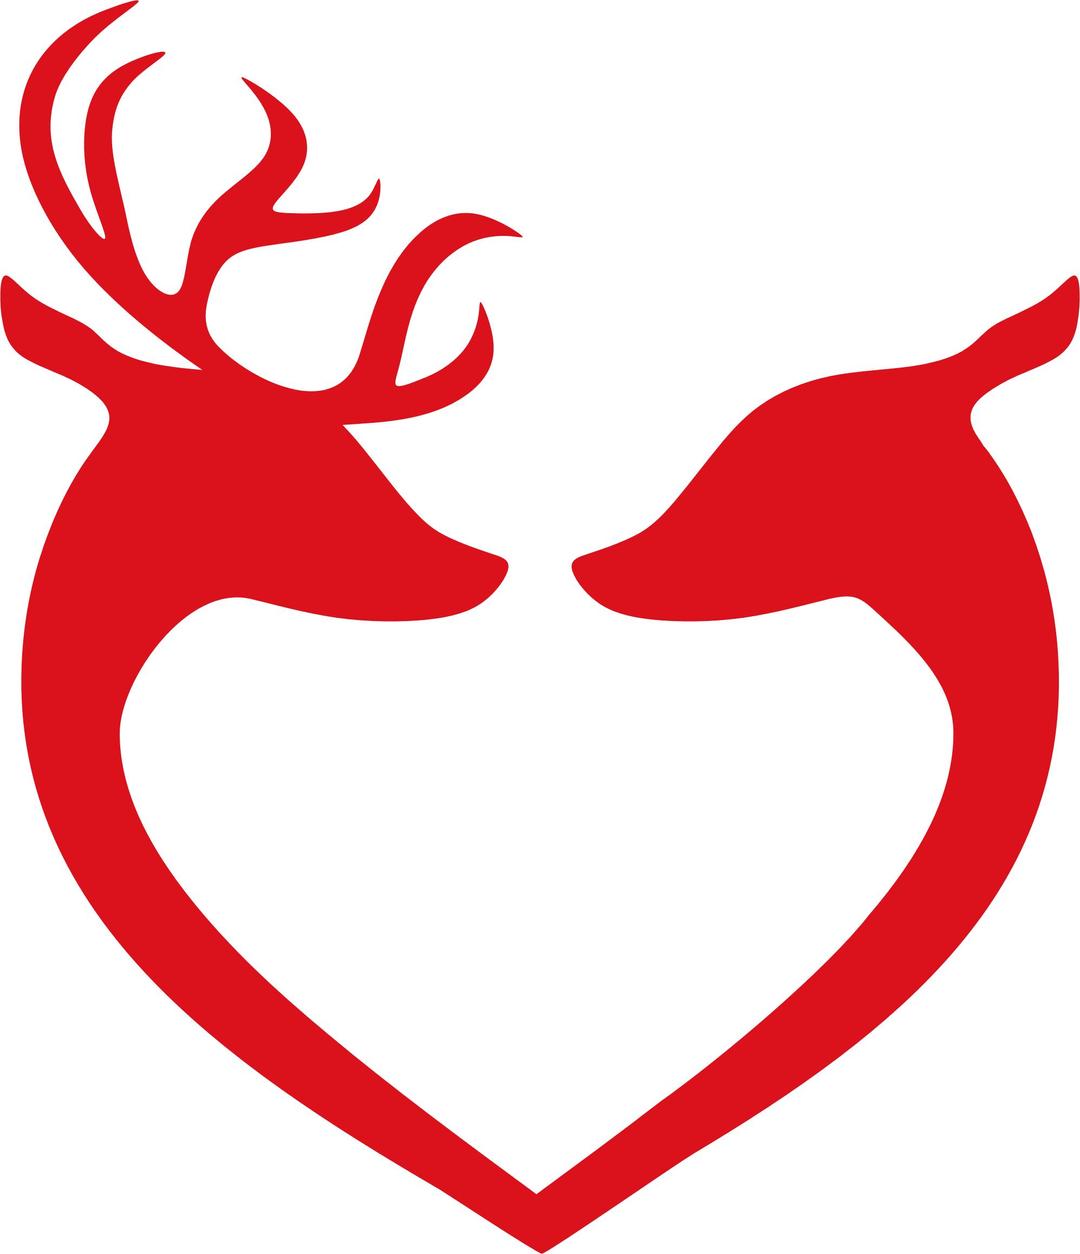 Deer Couple Heart Silhouette png transparent